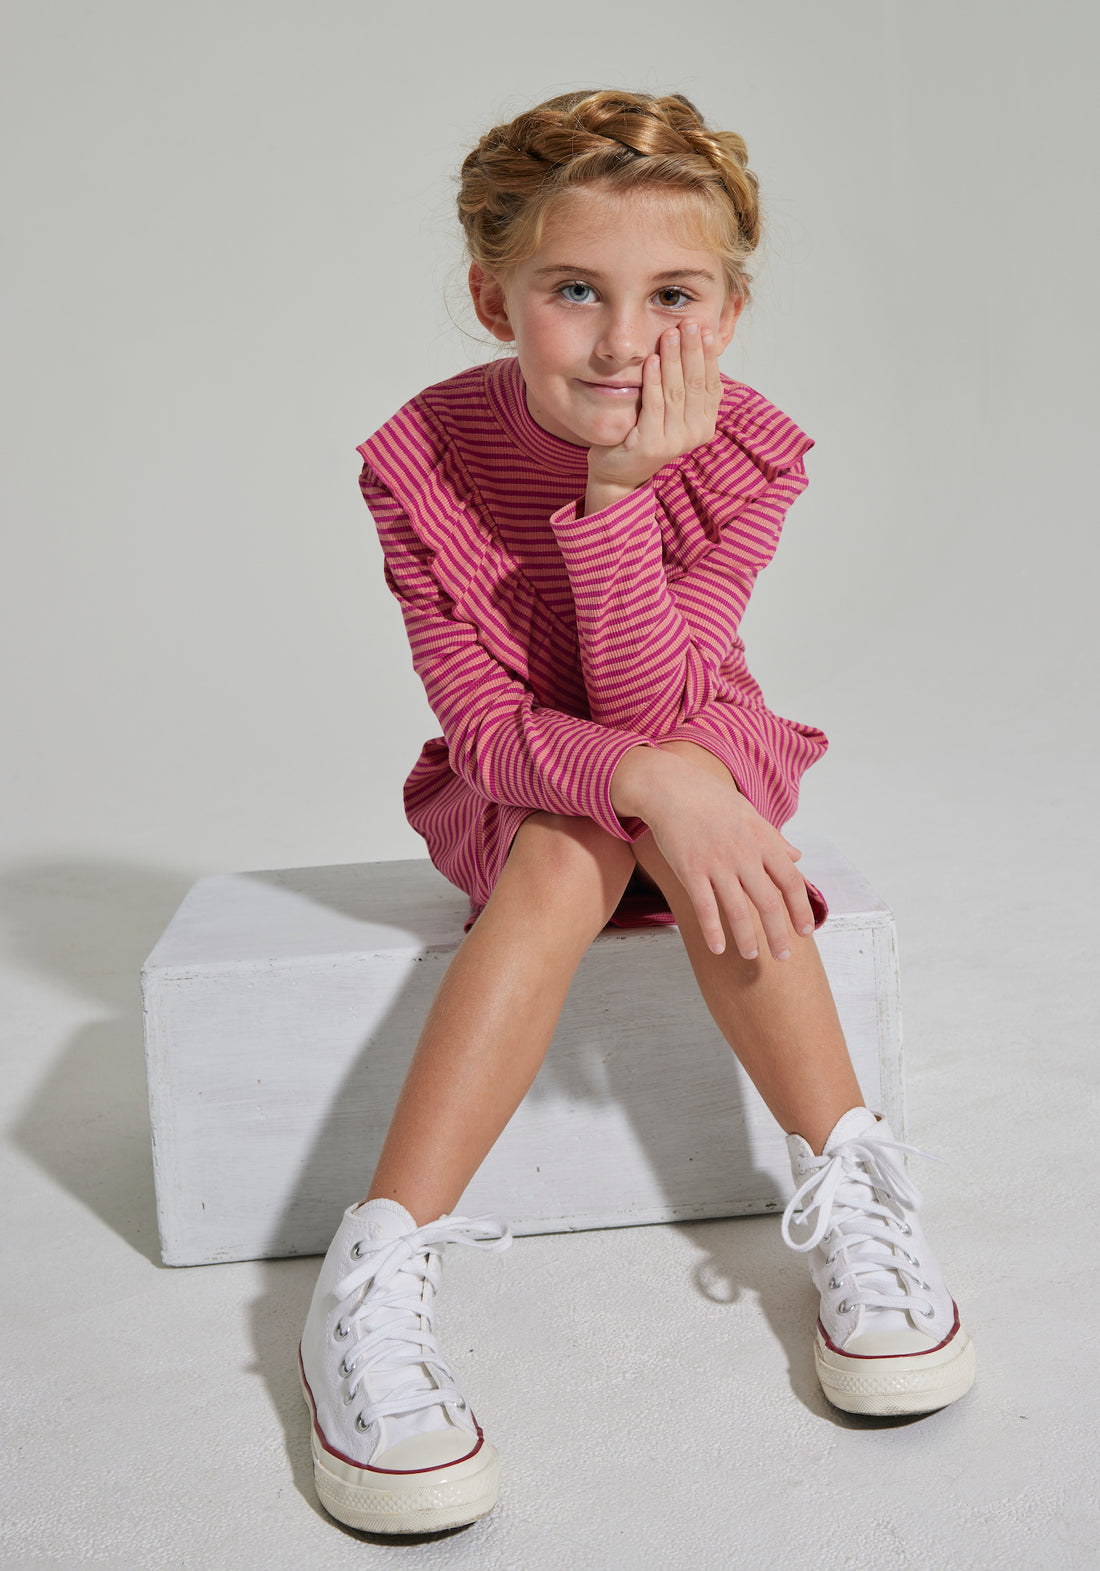 Our model can be seen wearing our Aspen Dress in Cranberry Metallic Stripe, which features the asymmetrical ruffle across top and long sleeves as well--BISBY girl